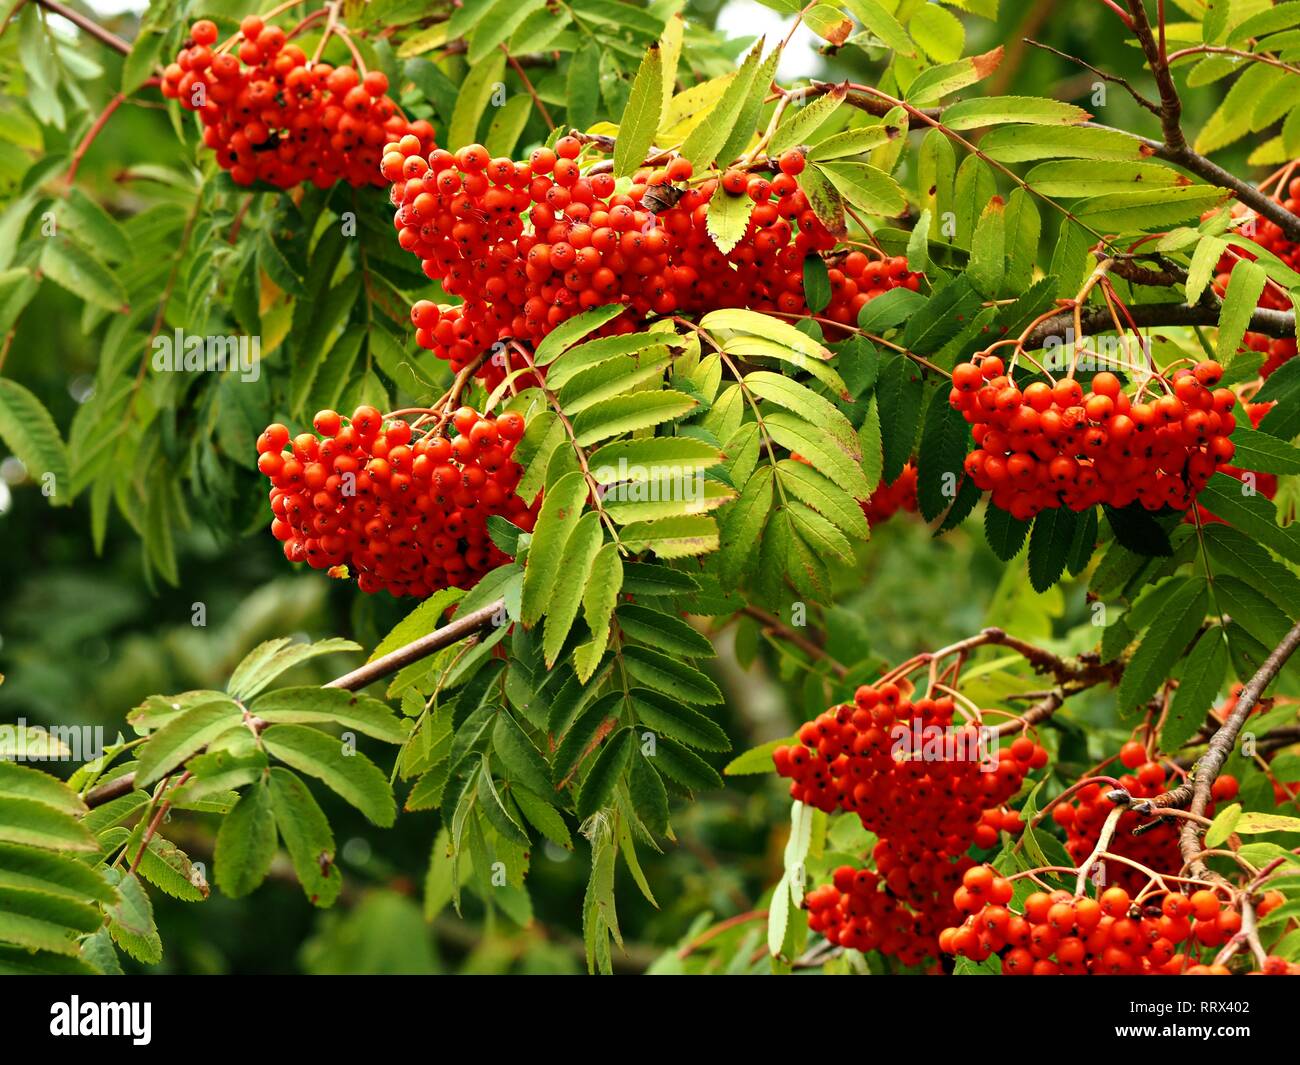 Clumps of shiny red berries on a rowan tree (mountain ash) with green leaves in late summer Stock Photo